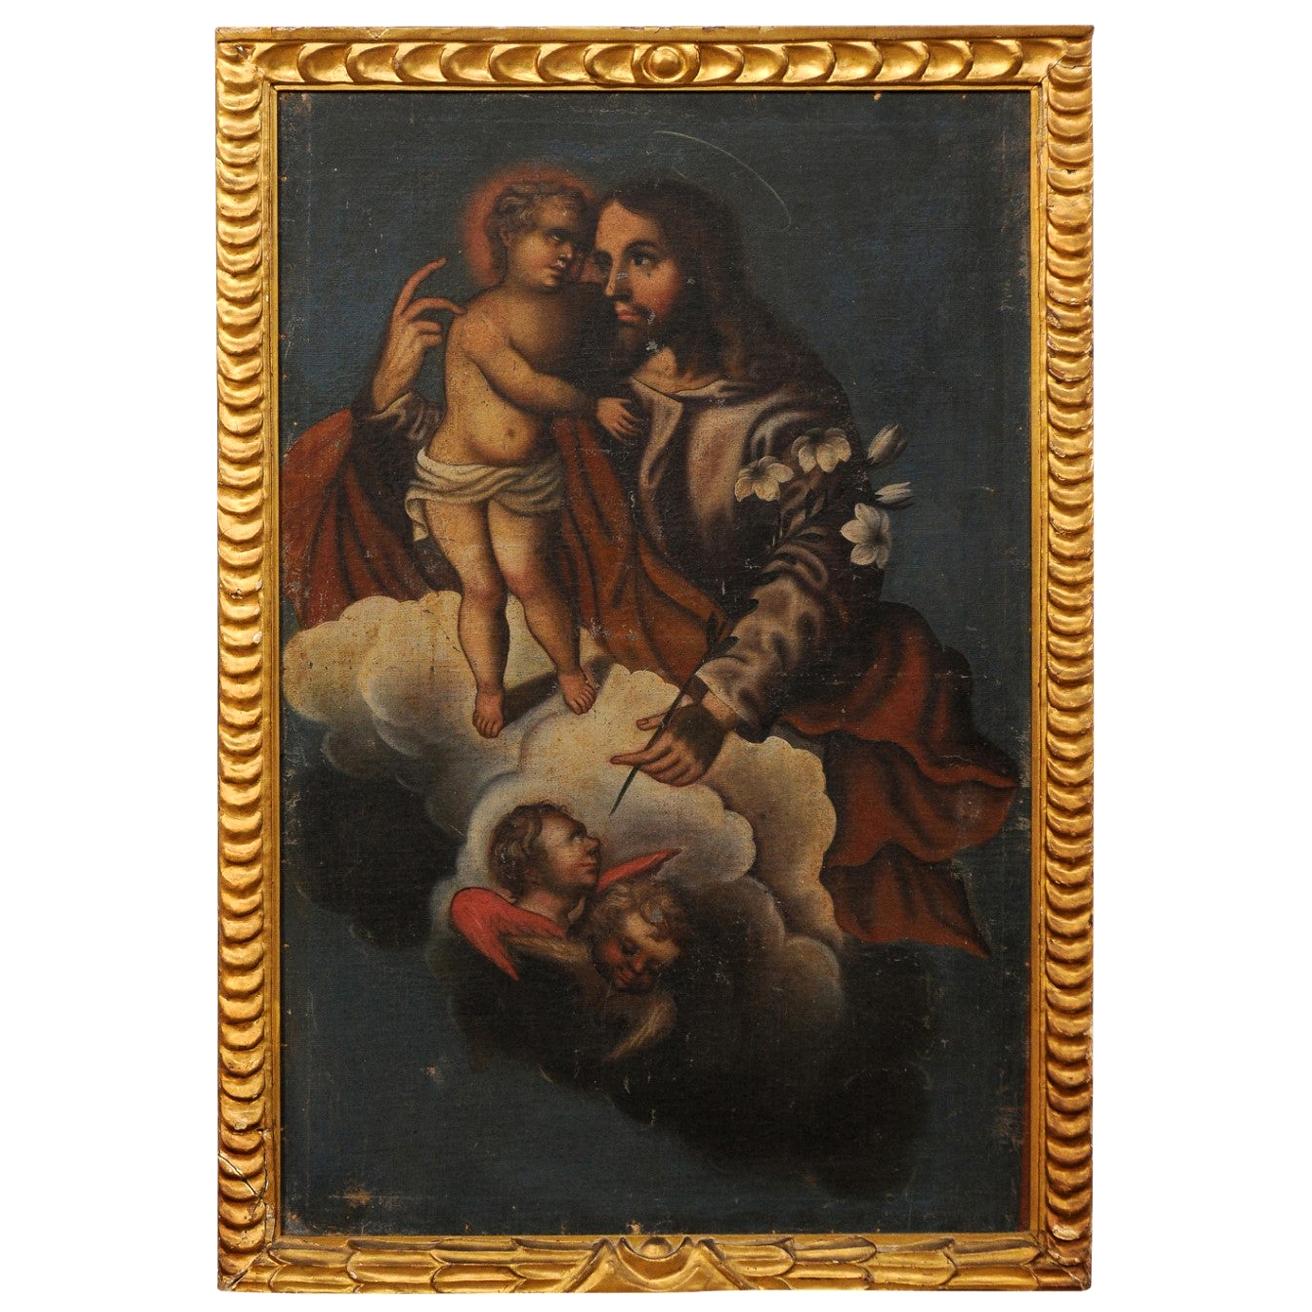 Spanish Colonial Painting of Jesus with Child, in 19th Century Gilt Frame